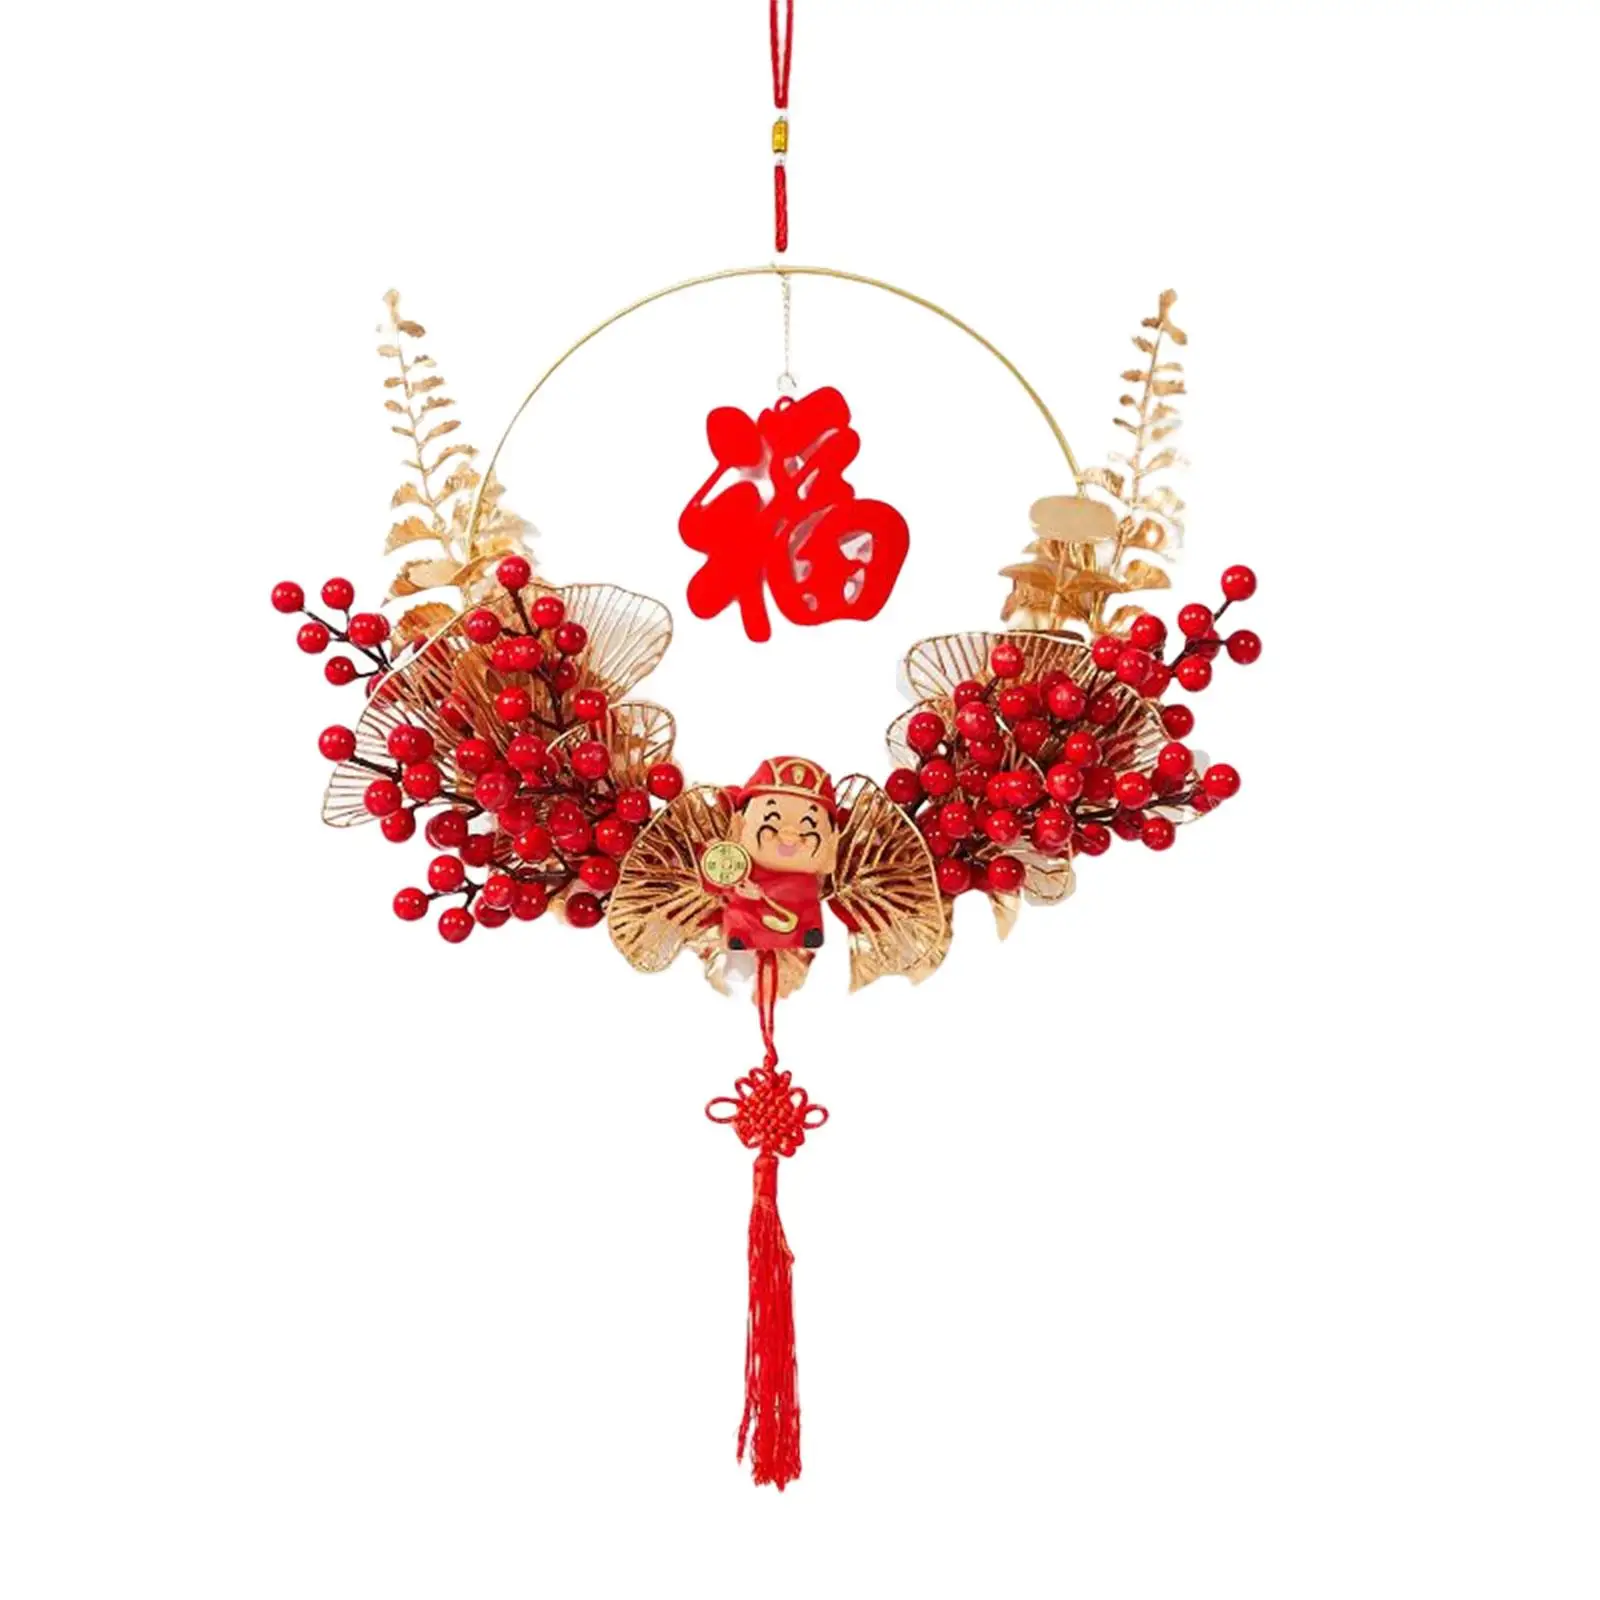 Handcraft Chinese New Year Wreath with Chinese Knot Tassel Fu Character Adornment Hanging Garland for Door Tree Decor